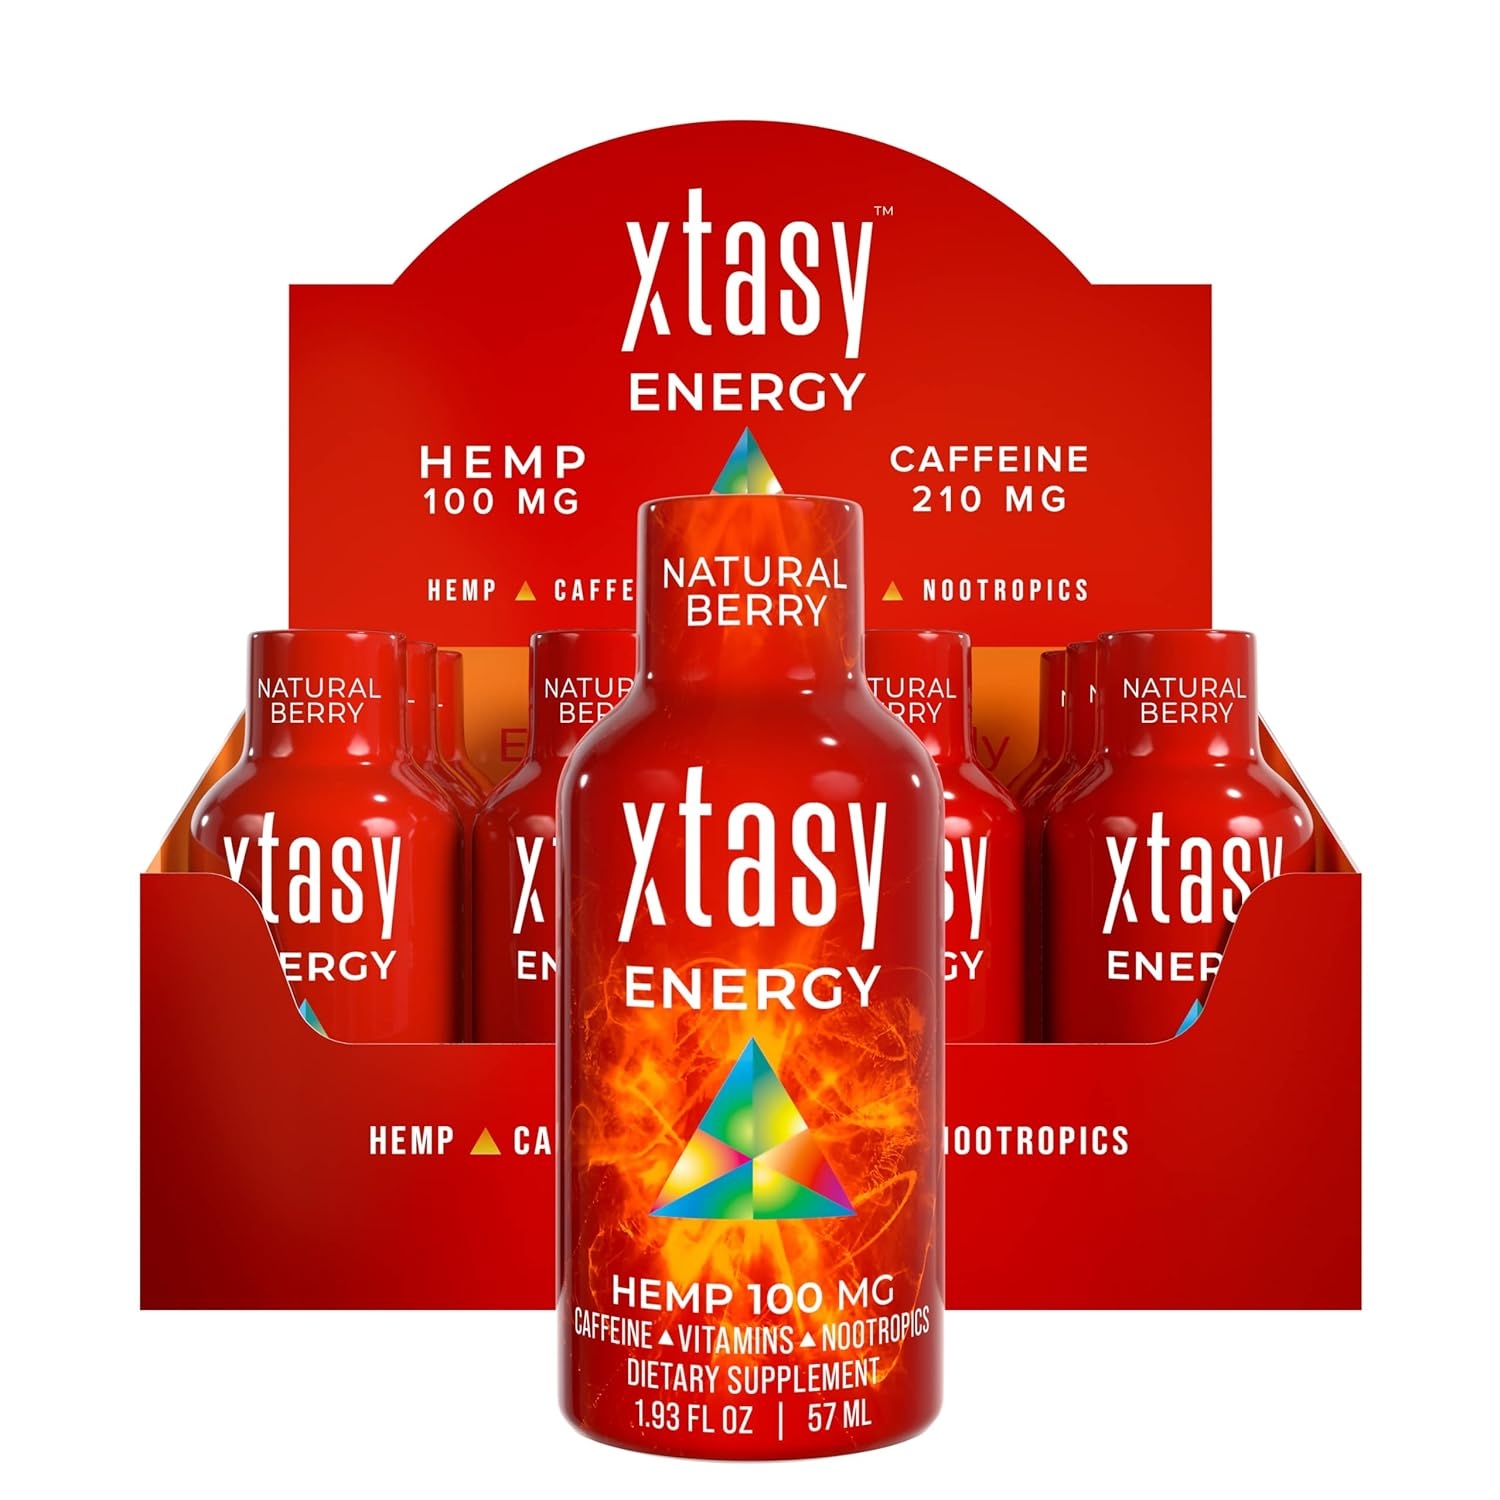 Xtasy Energy Shot - Energy Drink - Nootropic Pre-Workout - Xtasy Energy Powers Mind and Body Like No Other Pre-Workout or Energy Drink (3 Pack)